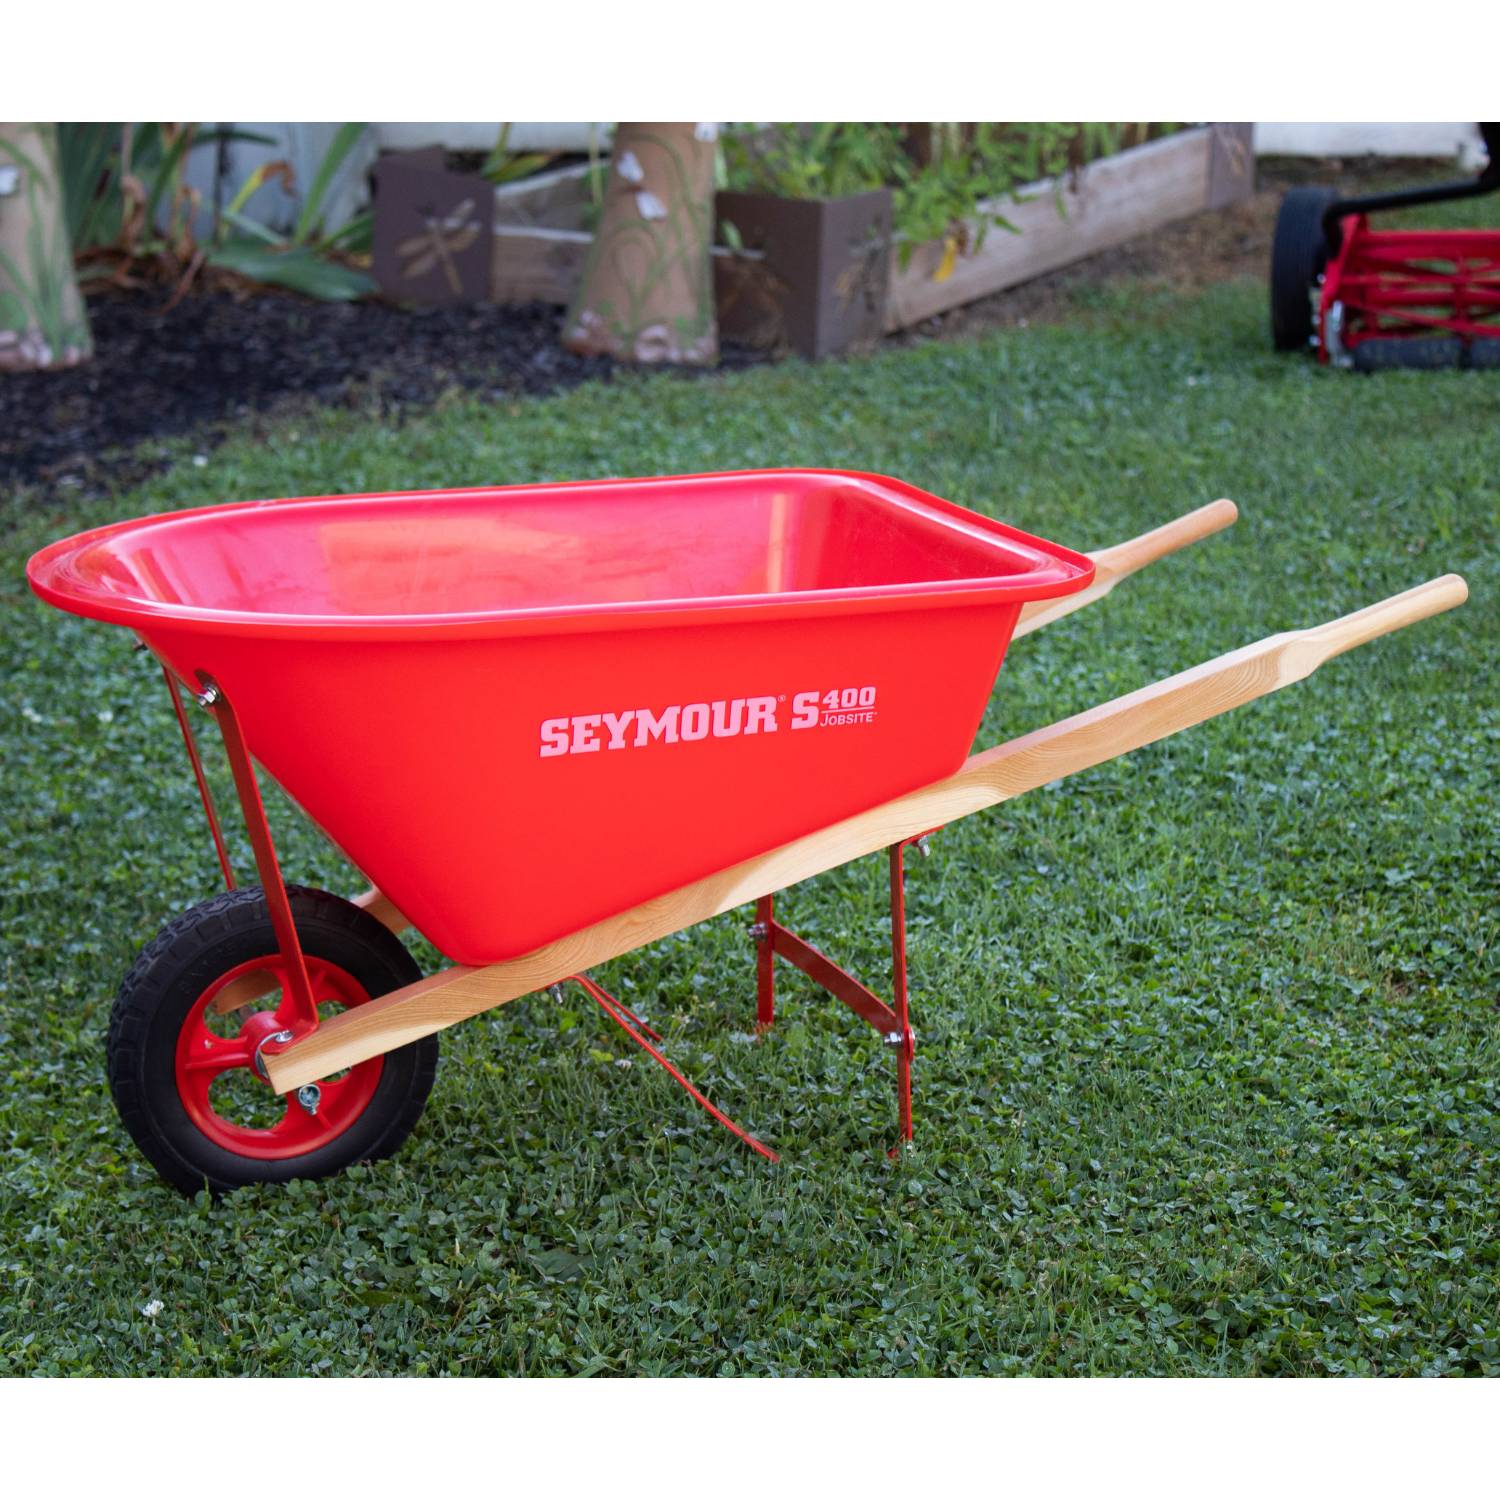 Seymour Fully Functional Metal Frame Poly Bed Wheelbarrow for Children Red - image 2 of 4